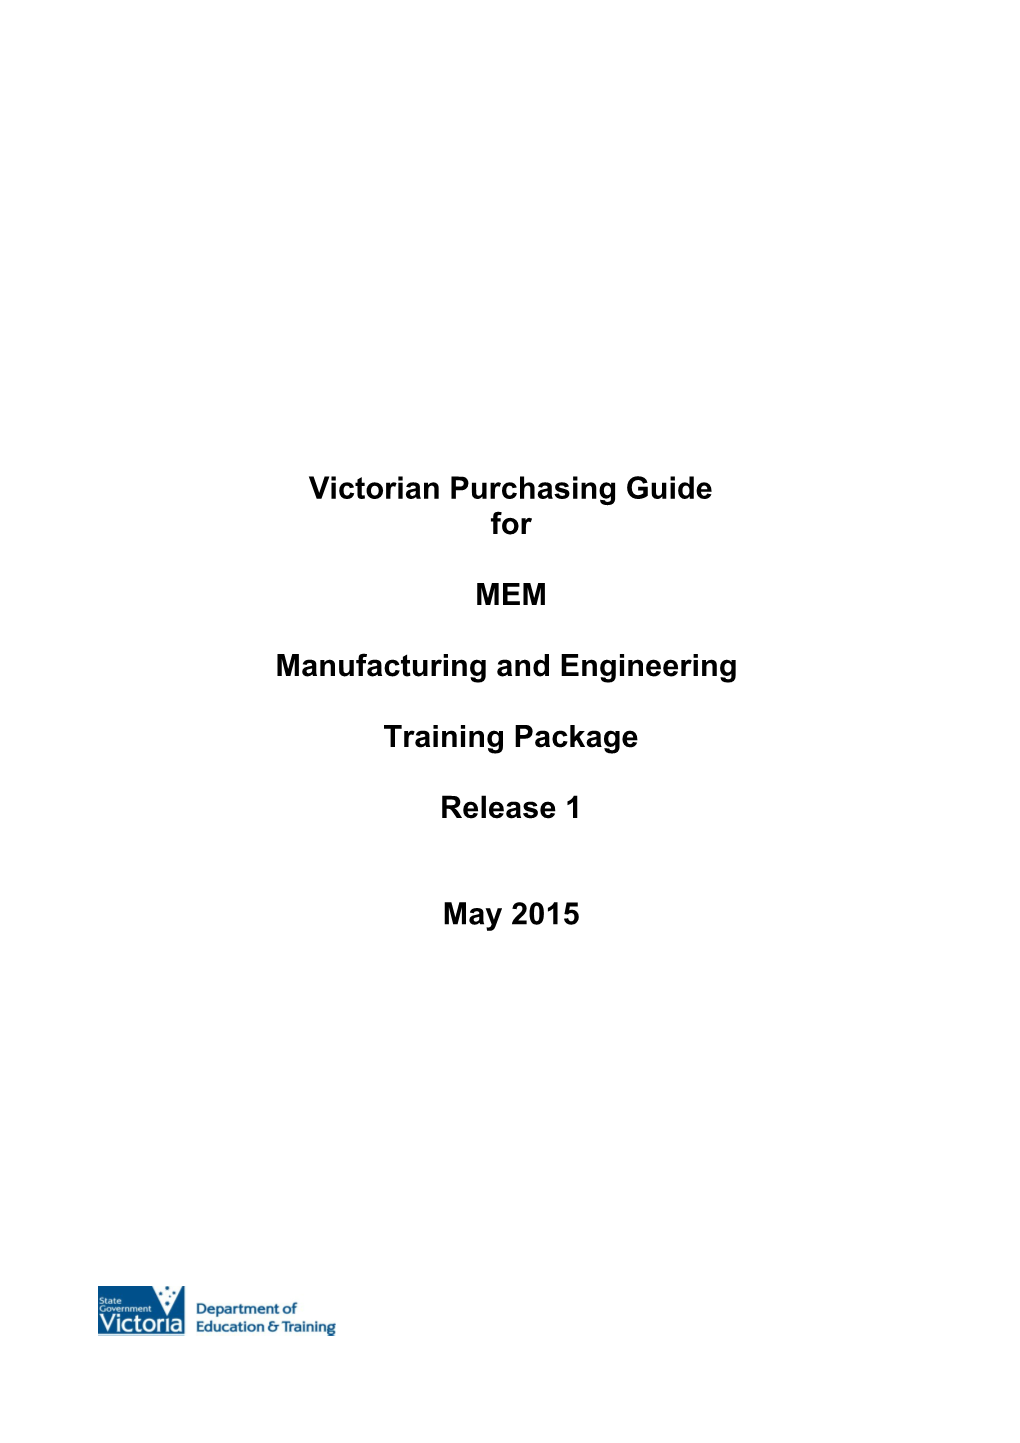 Victorian Purchasing Guide for MEM Manufacturing and Engineering